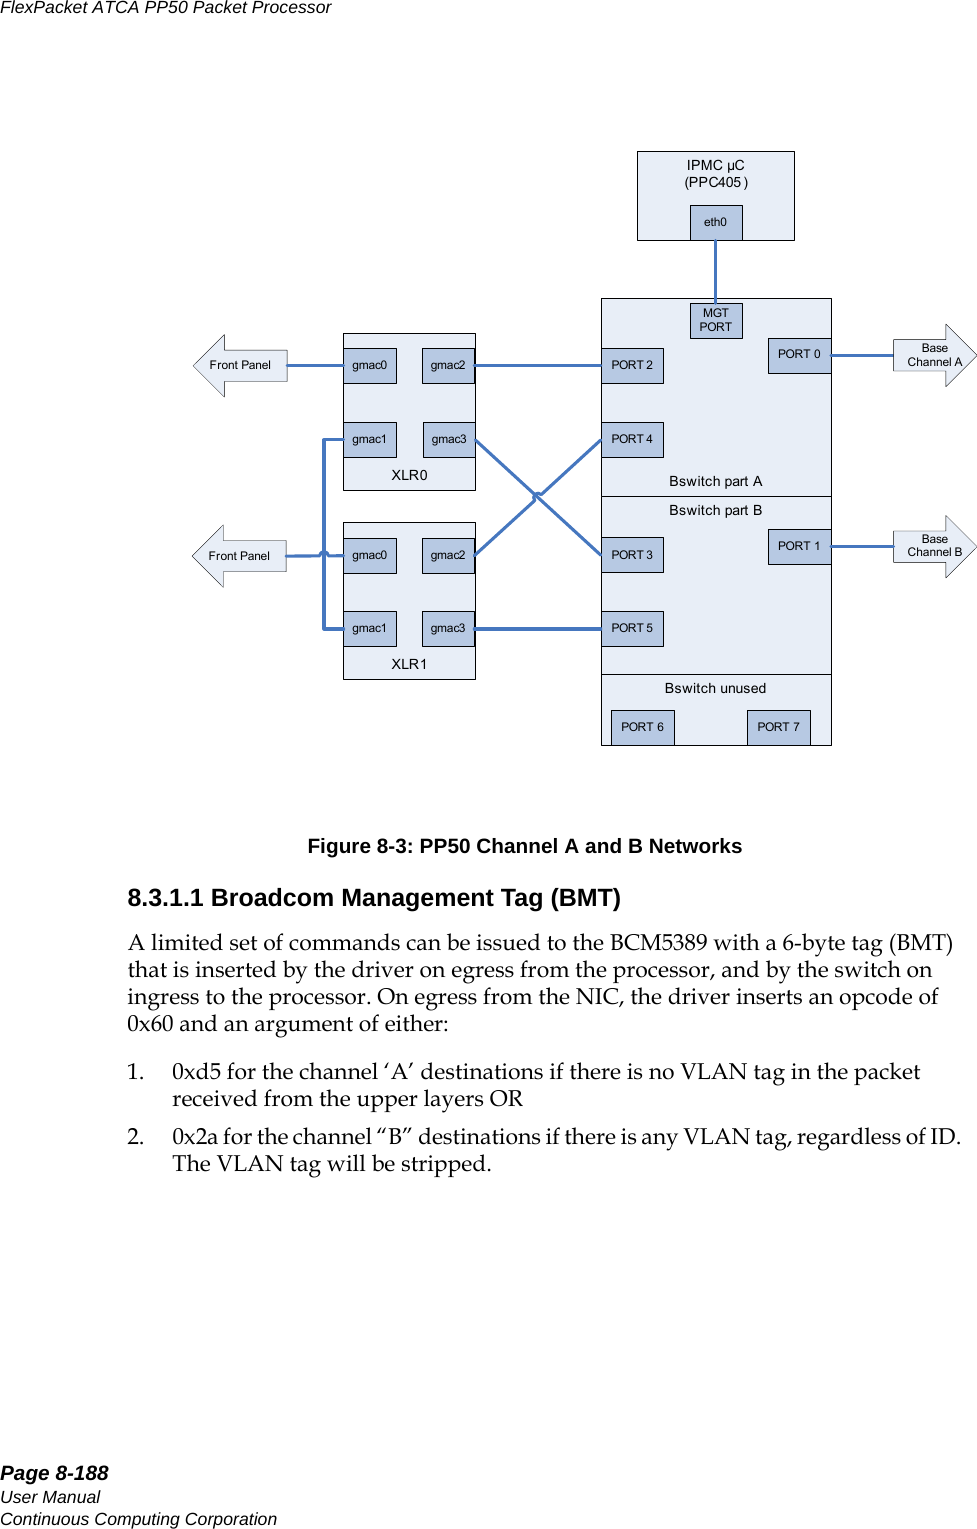 Page 8-188User ManualContinuous Computing CorporationFlexPacket ATCA PP50 Packet Processor     PreliminaryFigure 8-3: PP50 Channel A and B Networks8.3.1.1 Broadcom Management Tag (BMT)A limited set of commands can be issued to the BCM5389 with a 6-byte tag (BMT) that is inserted by the driver on egress from the processor, and by the switch on ingress to the processor. On egress from the NIC, the driver inserts an opcode of 0x60 and an argument of either:1. 0xd5 for the channel ‘A’ destinations if there is no VLAN tag in the packet received from the upper layers OR2. 0x2a for the channel “B” destinations if there is any VLAN tag, regardless of ID.   The VLAN tag will be stripped.Bswitch unusedBswitch part BIPMC μC(PPC405 )Bswitch part AMGT PORTPORT 0PORT 1PORT 6PORT 5PORT 2PORT 7Front PanelPORT 4PORT 3eth0Front PanelBase Channel BXLR1gmac2gmac1gmac0gmac3XLR0gmac2gmac1gmac0gmac3Base Channel A